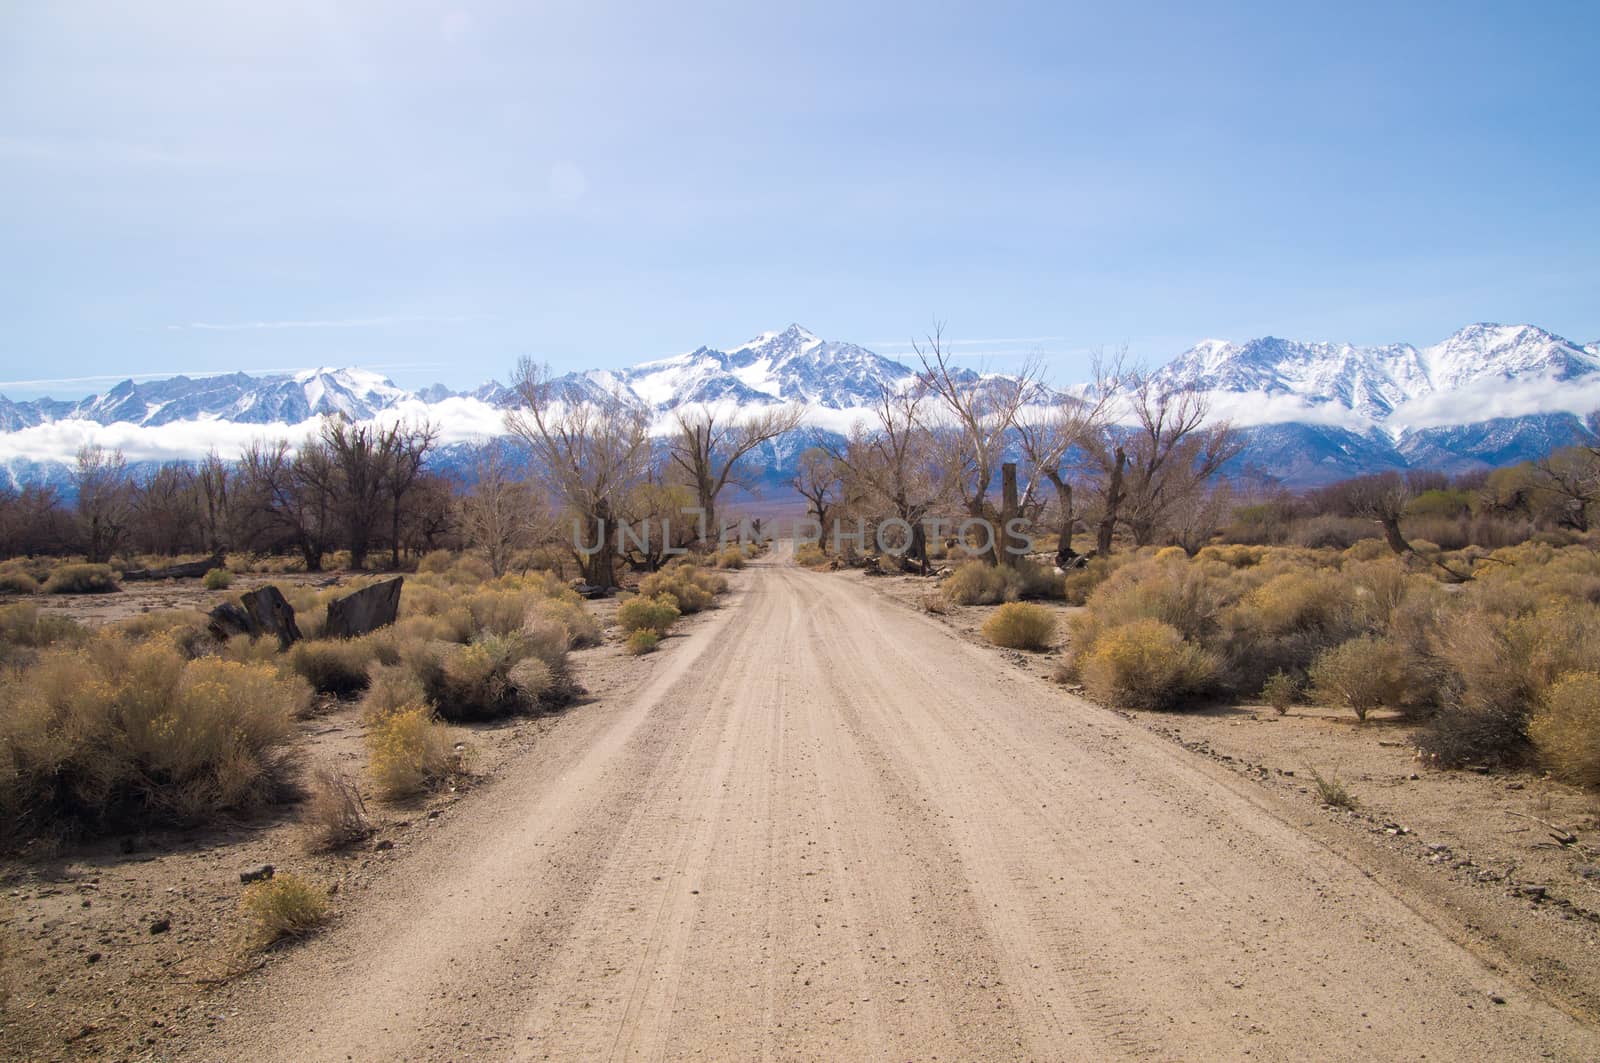 Dirt road leads to snow covered Sierra Nevada mountains in Sprin by emattil